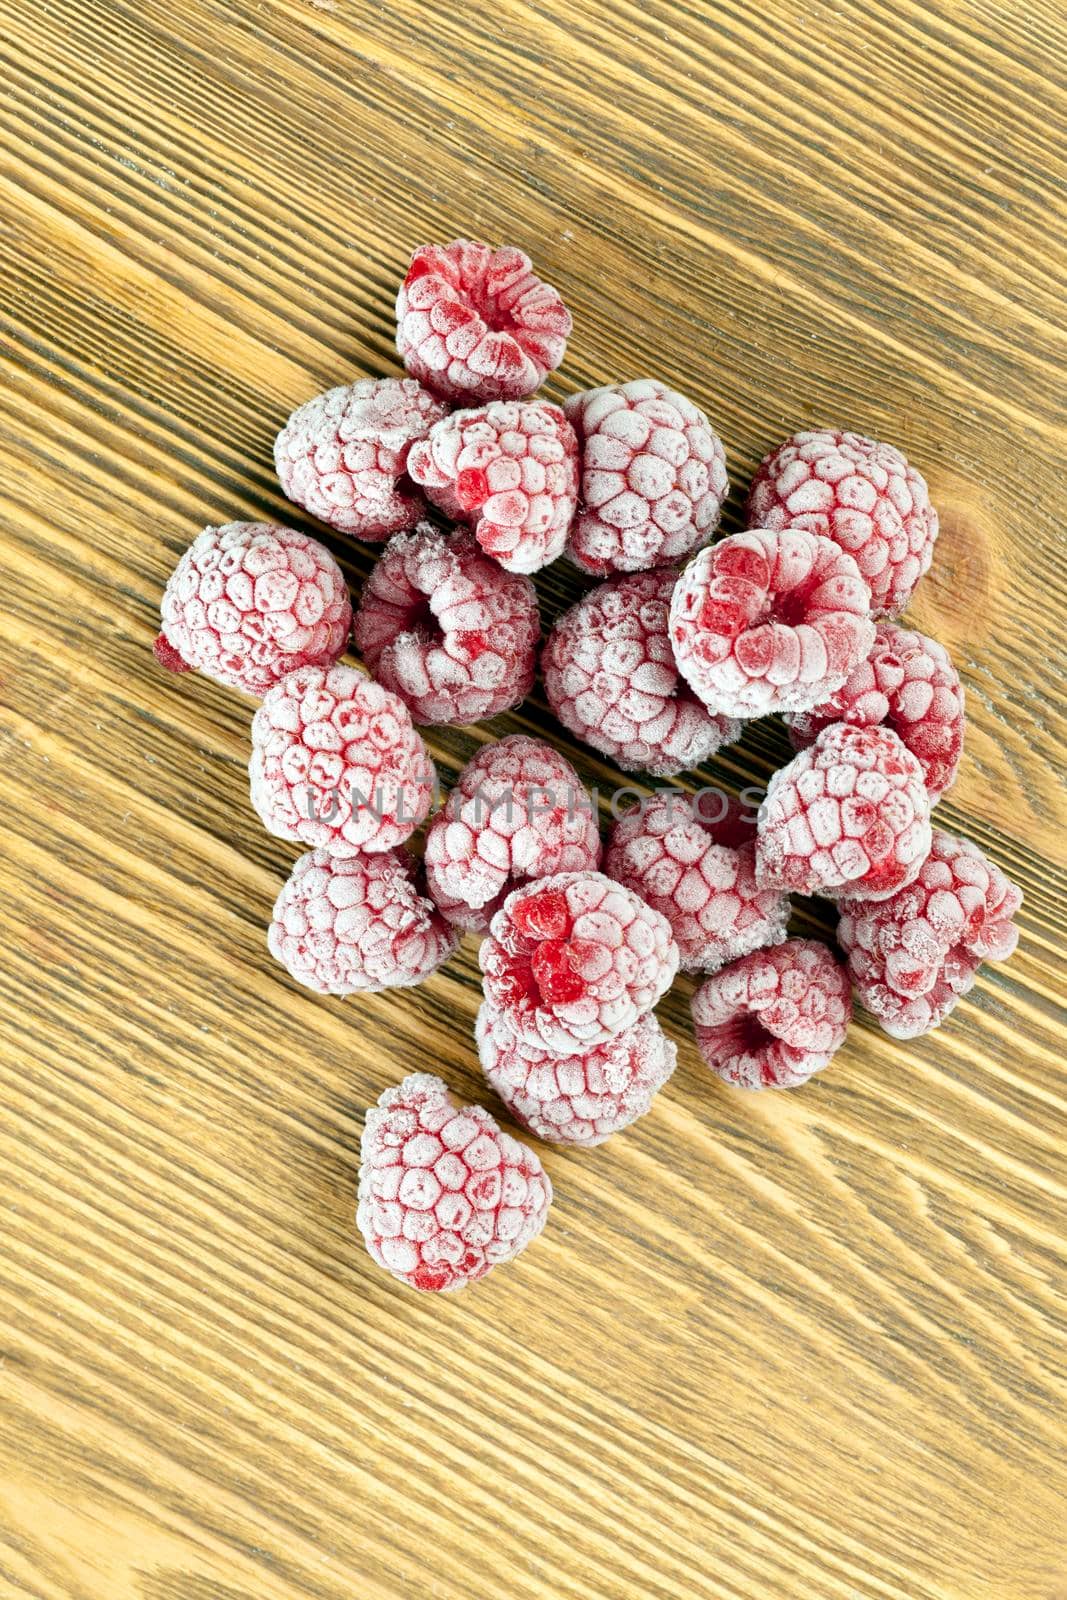 frozen raspberries during defrosting, photo closeup with frosted crystals